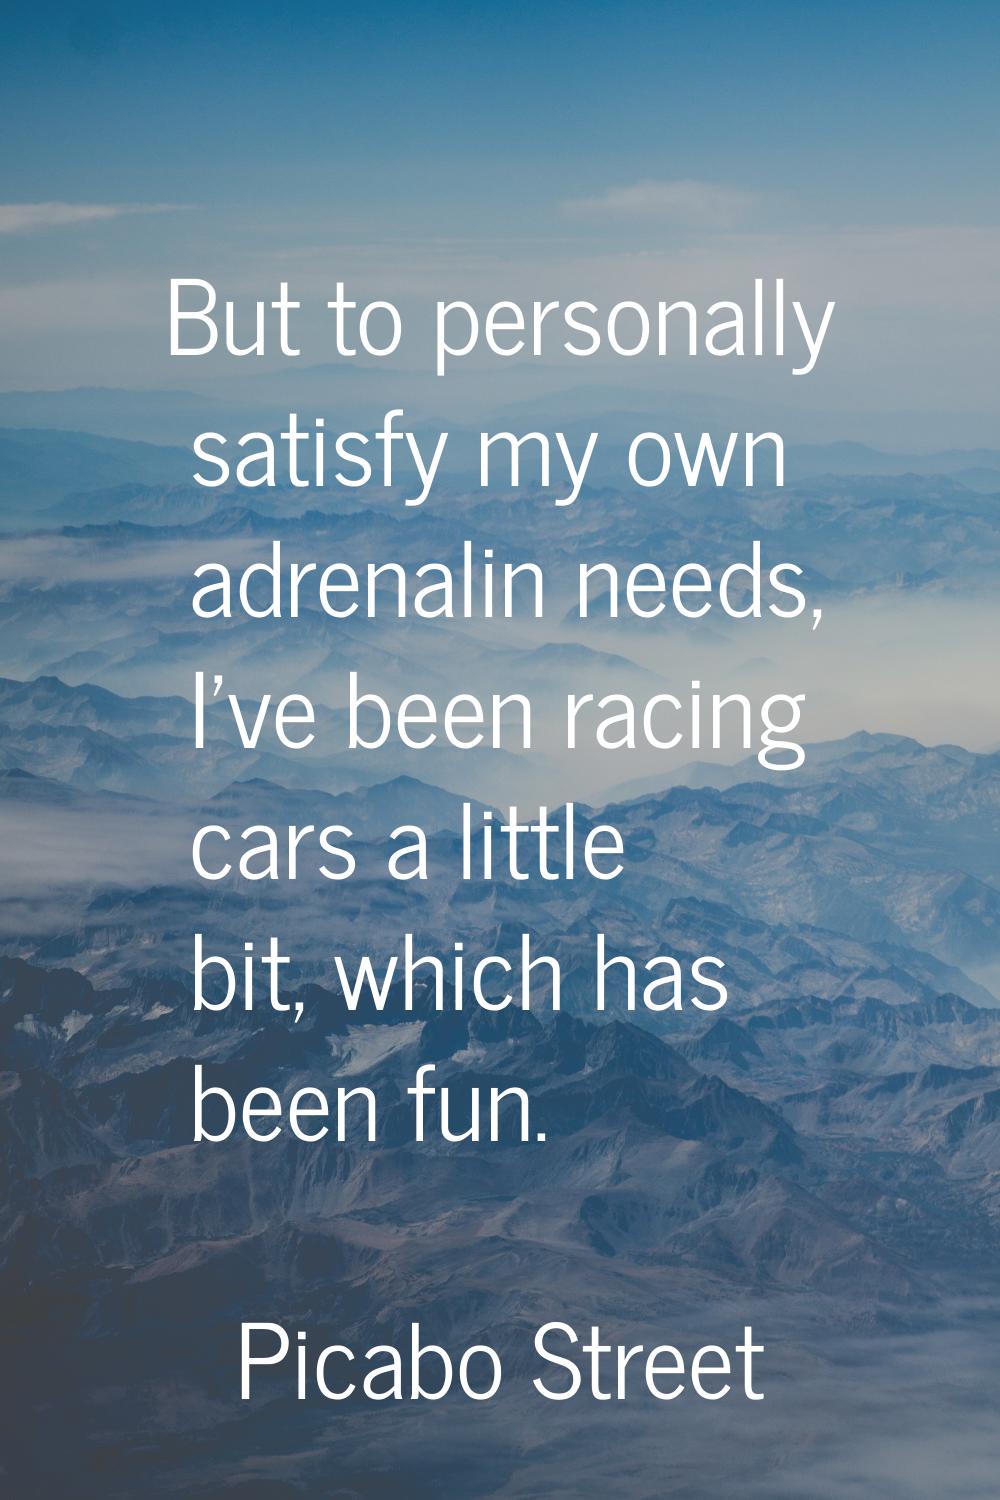 But to personally satisfy my own adrenalin needs, I've been racing cars a little bit, which has bee